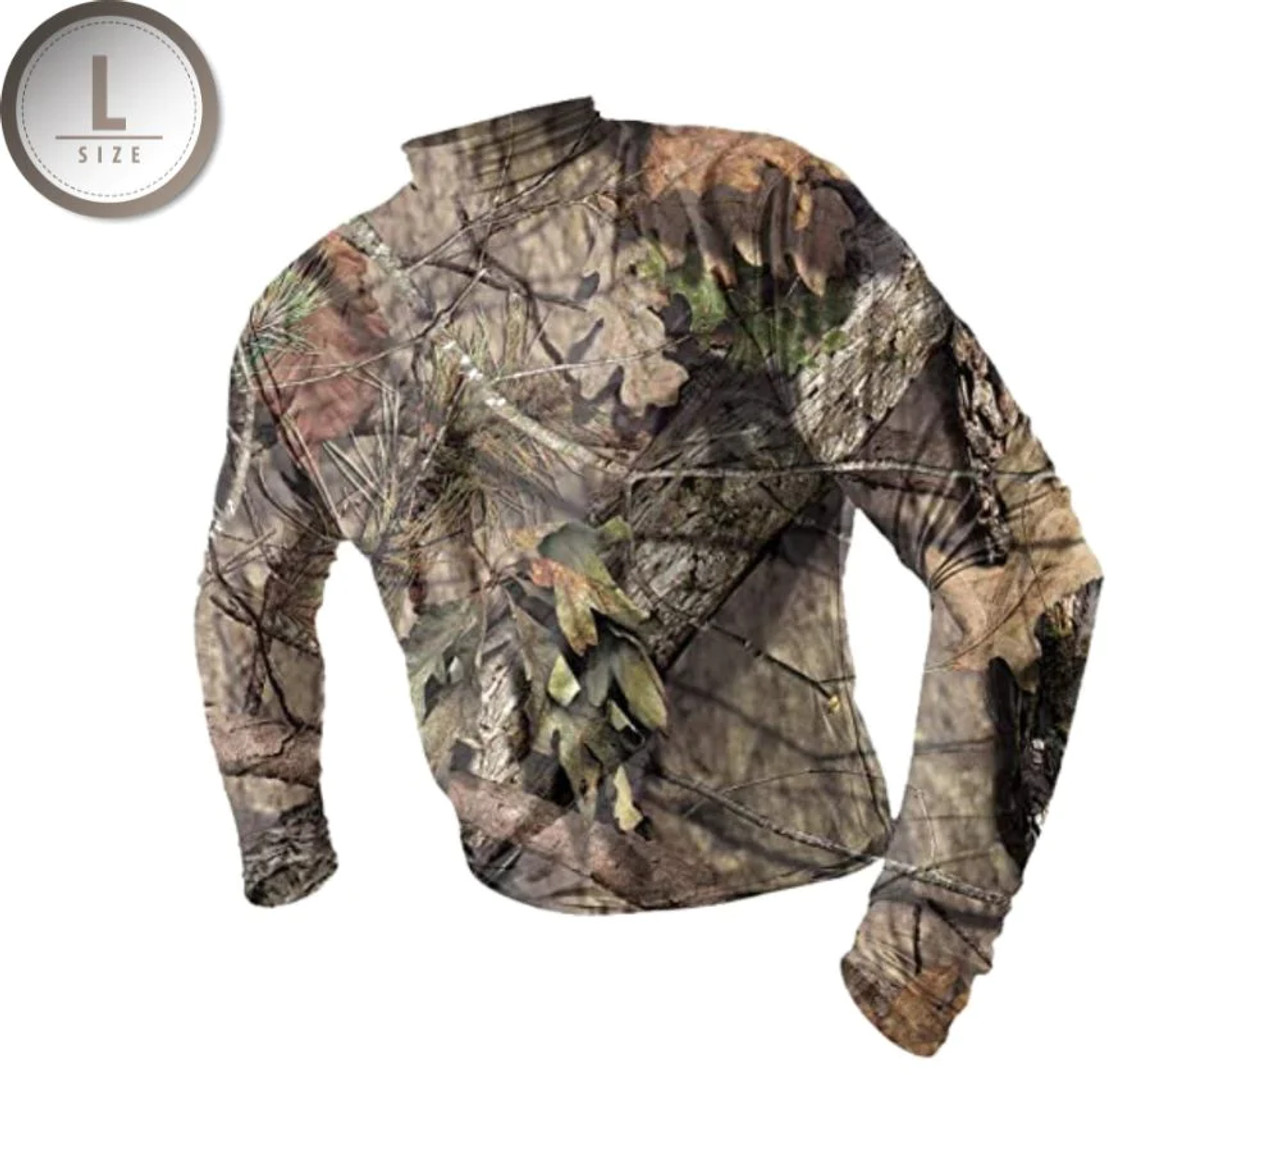 Rynoskin Long Sleeve Shirt with UV Layer & Bite Protection, Large, Mossy Oak Country